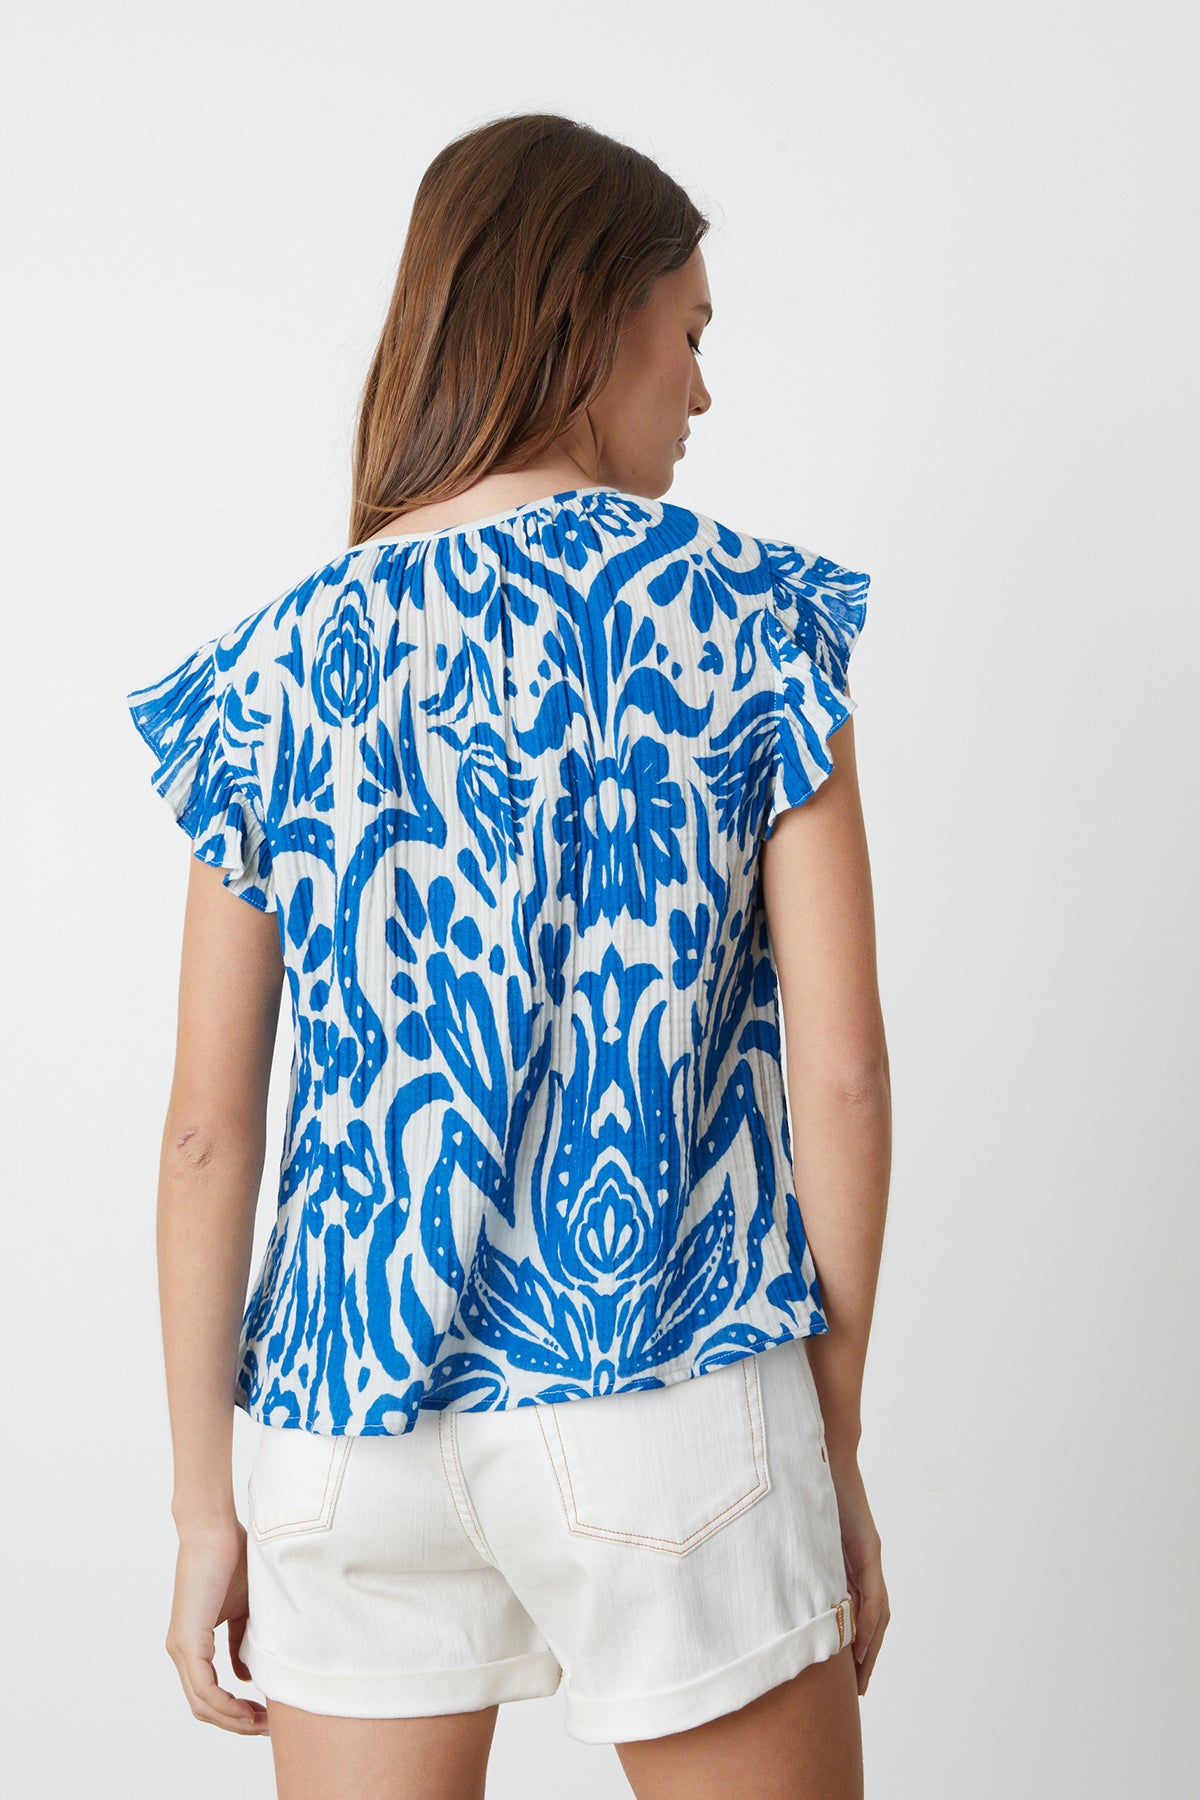 The back view of a woman wearing a Velvet by Graham & Spencer ALEAH PRINTED COTTON GAUZE TOP.-26342683443393